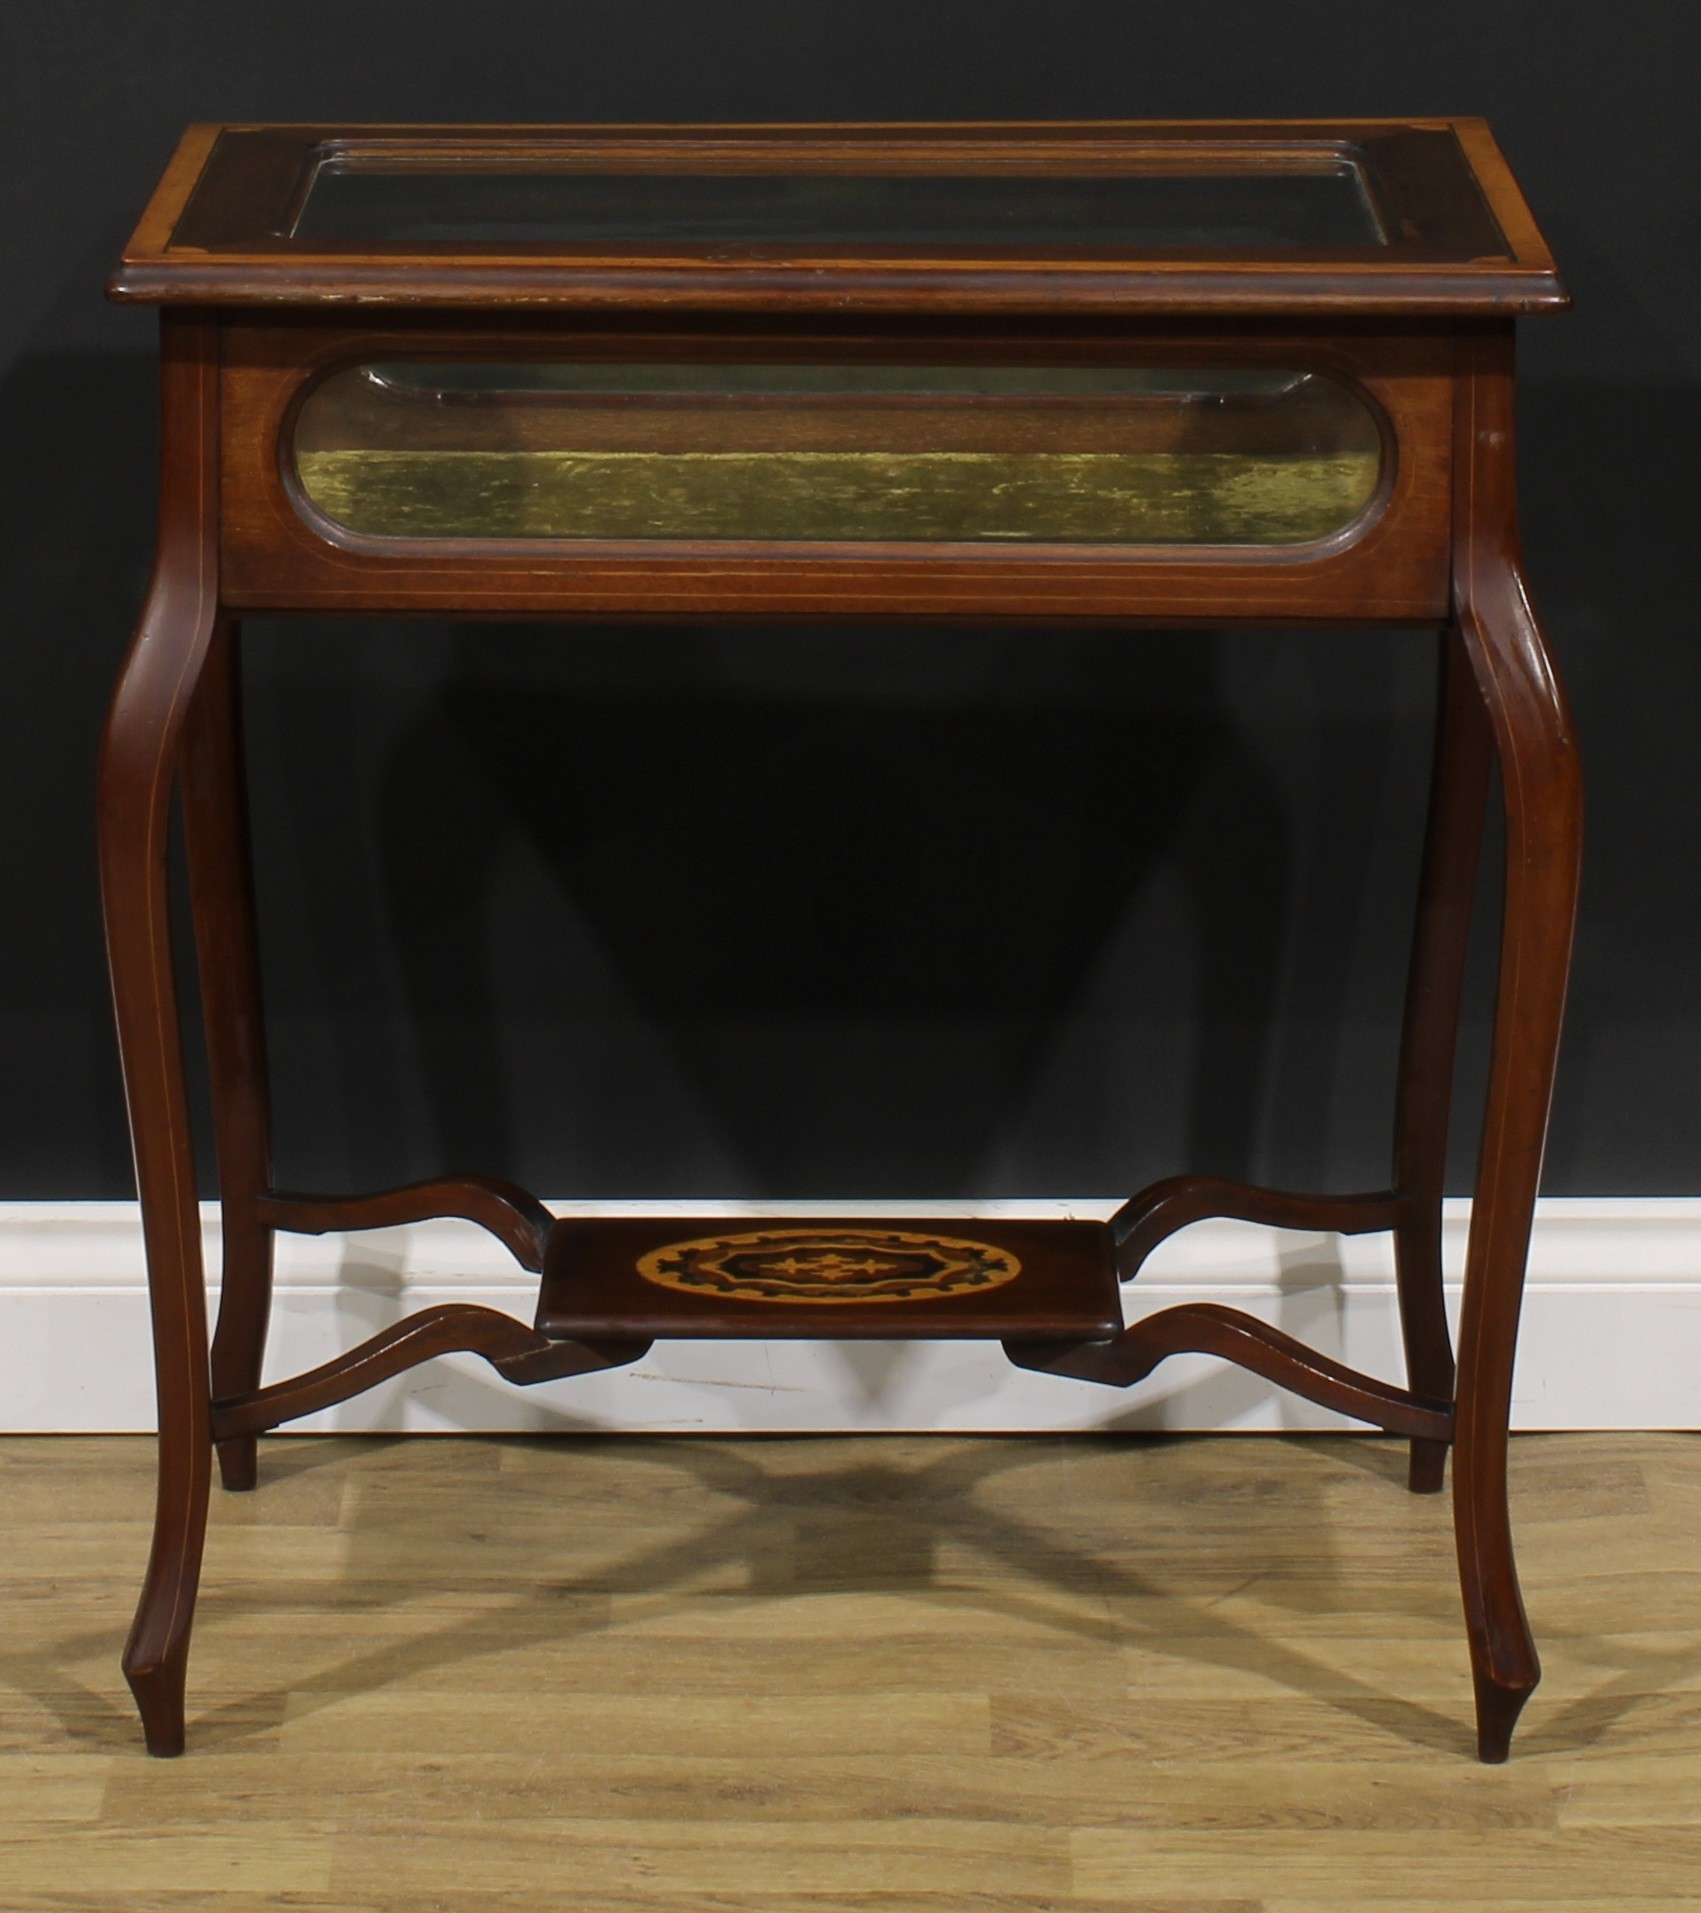 An Edwardian satinwood banded mahogany and marquetry bijouterie table, hinged top, French cabriole - Image 5 of 5